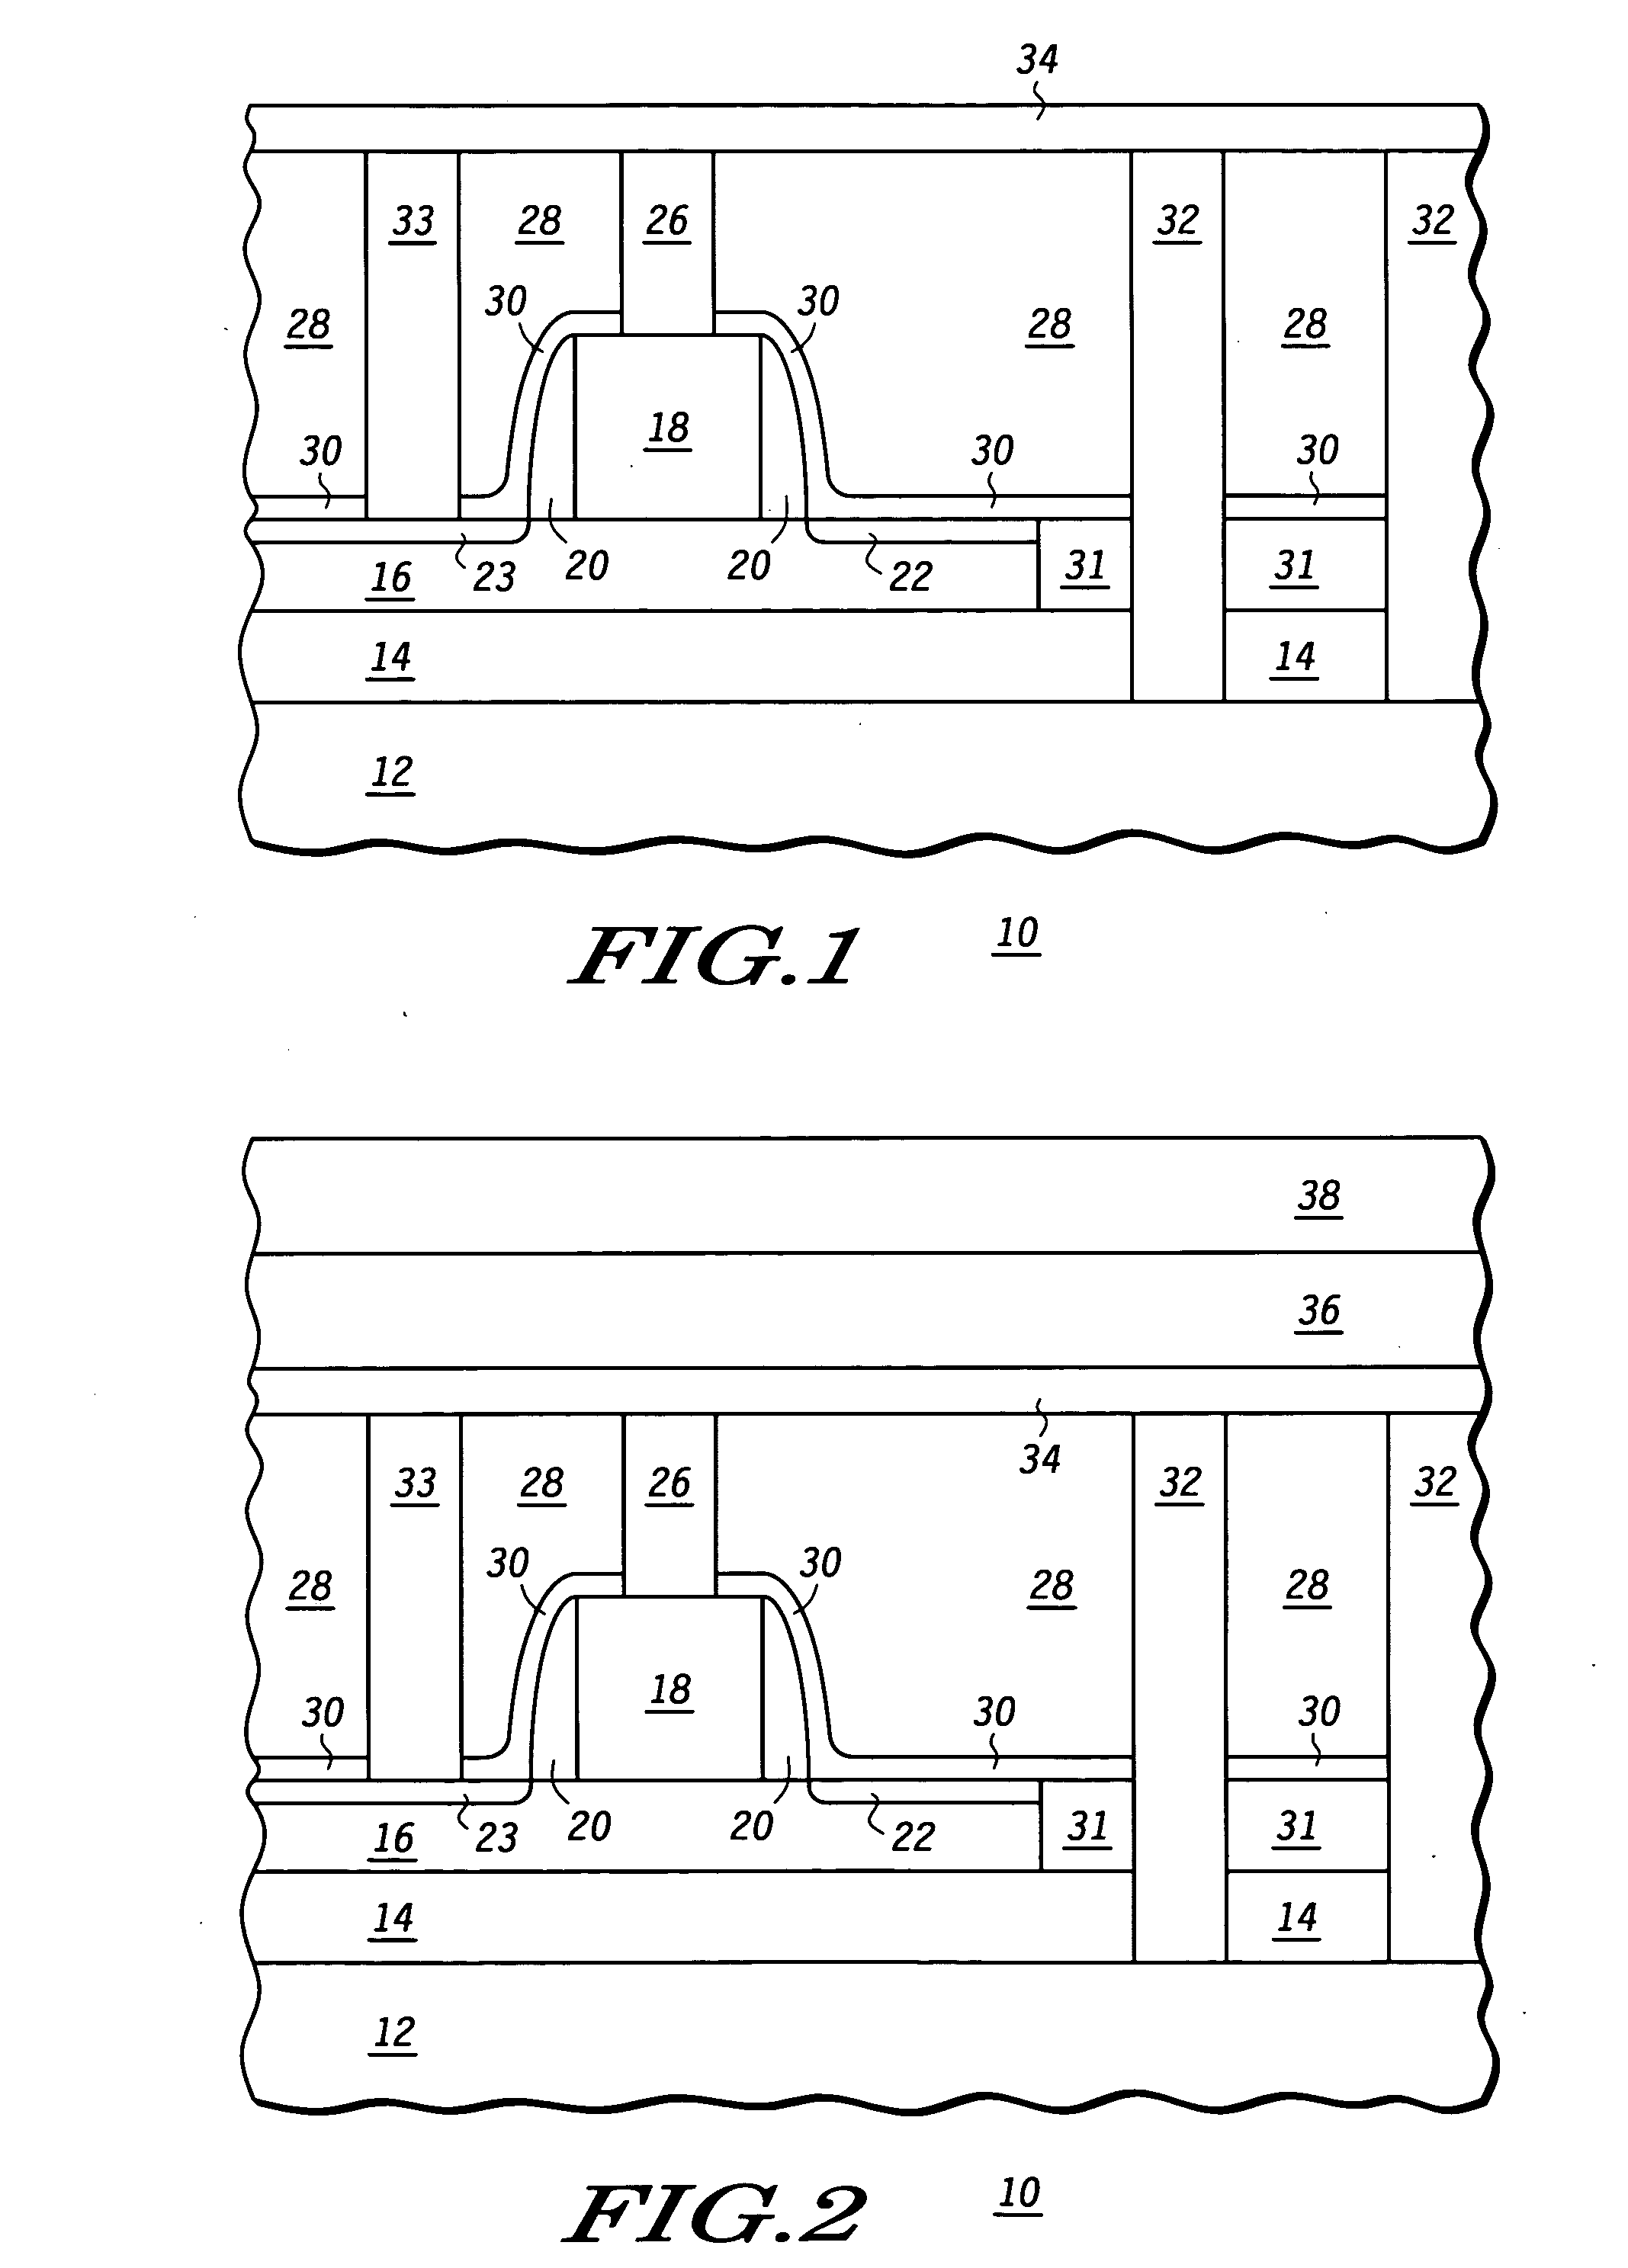 Semiconductor device having electrical contact from opposite sides